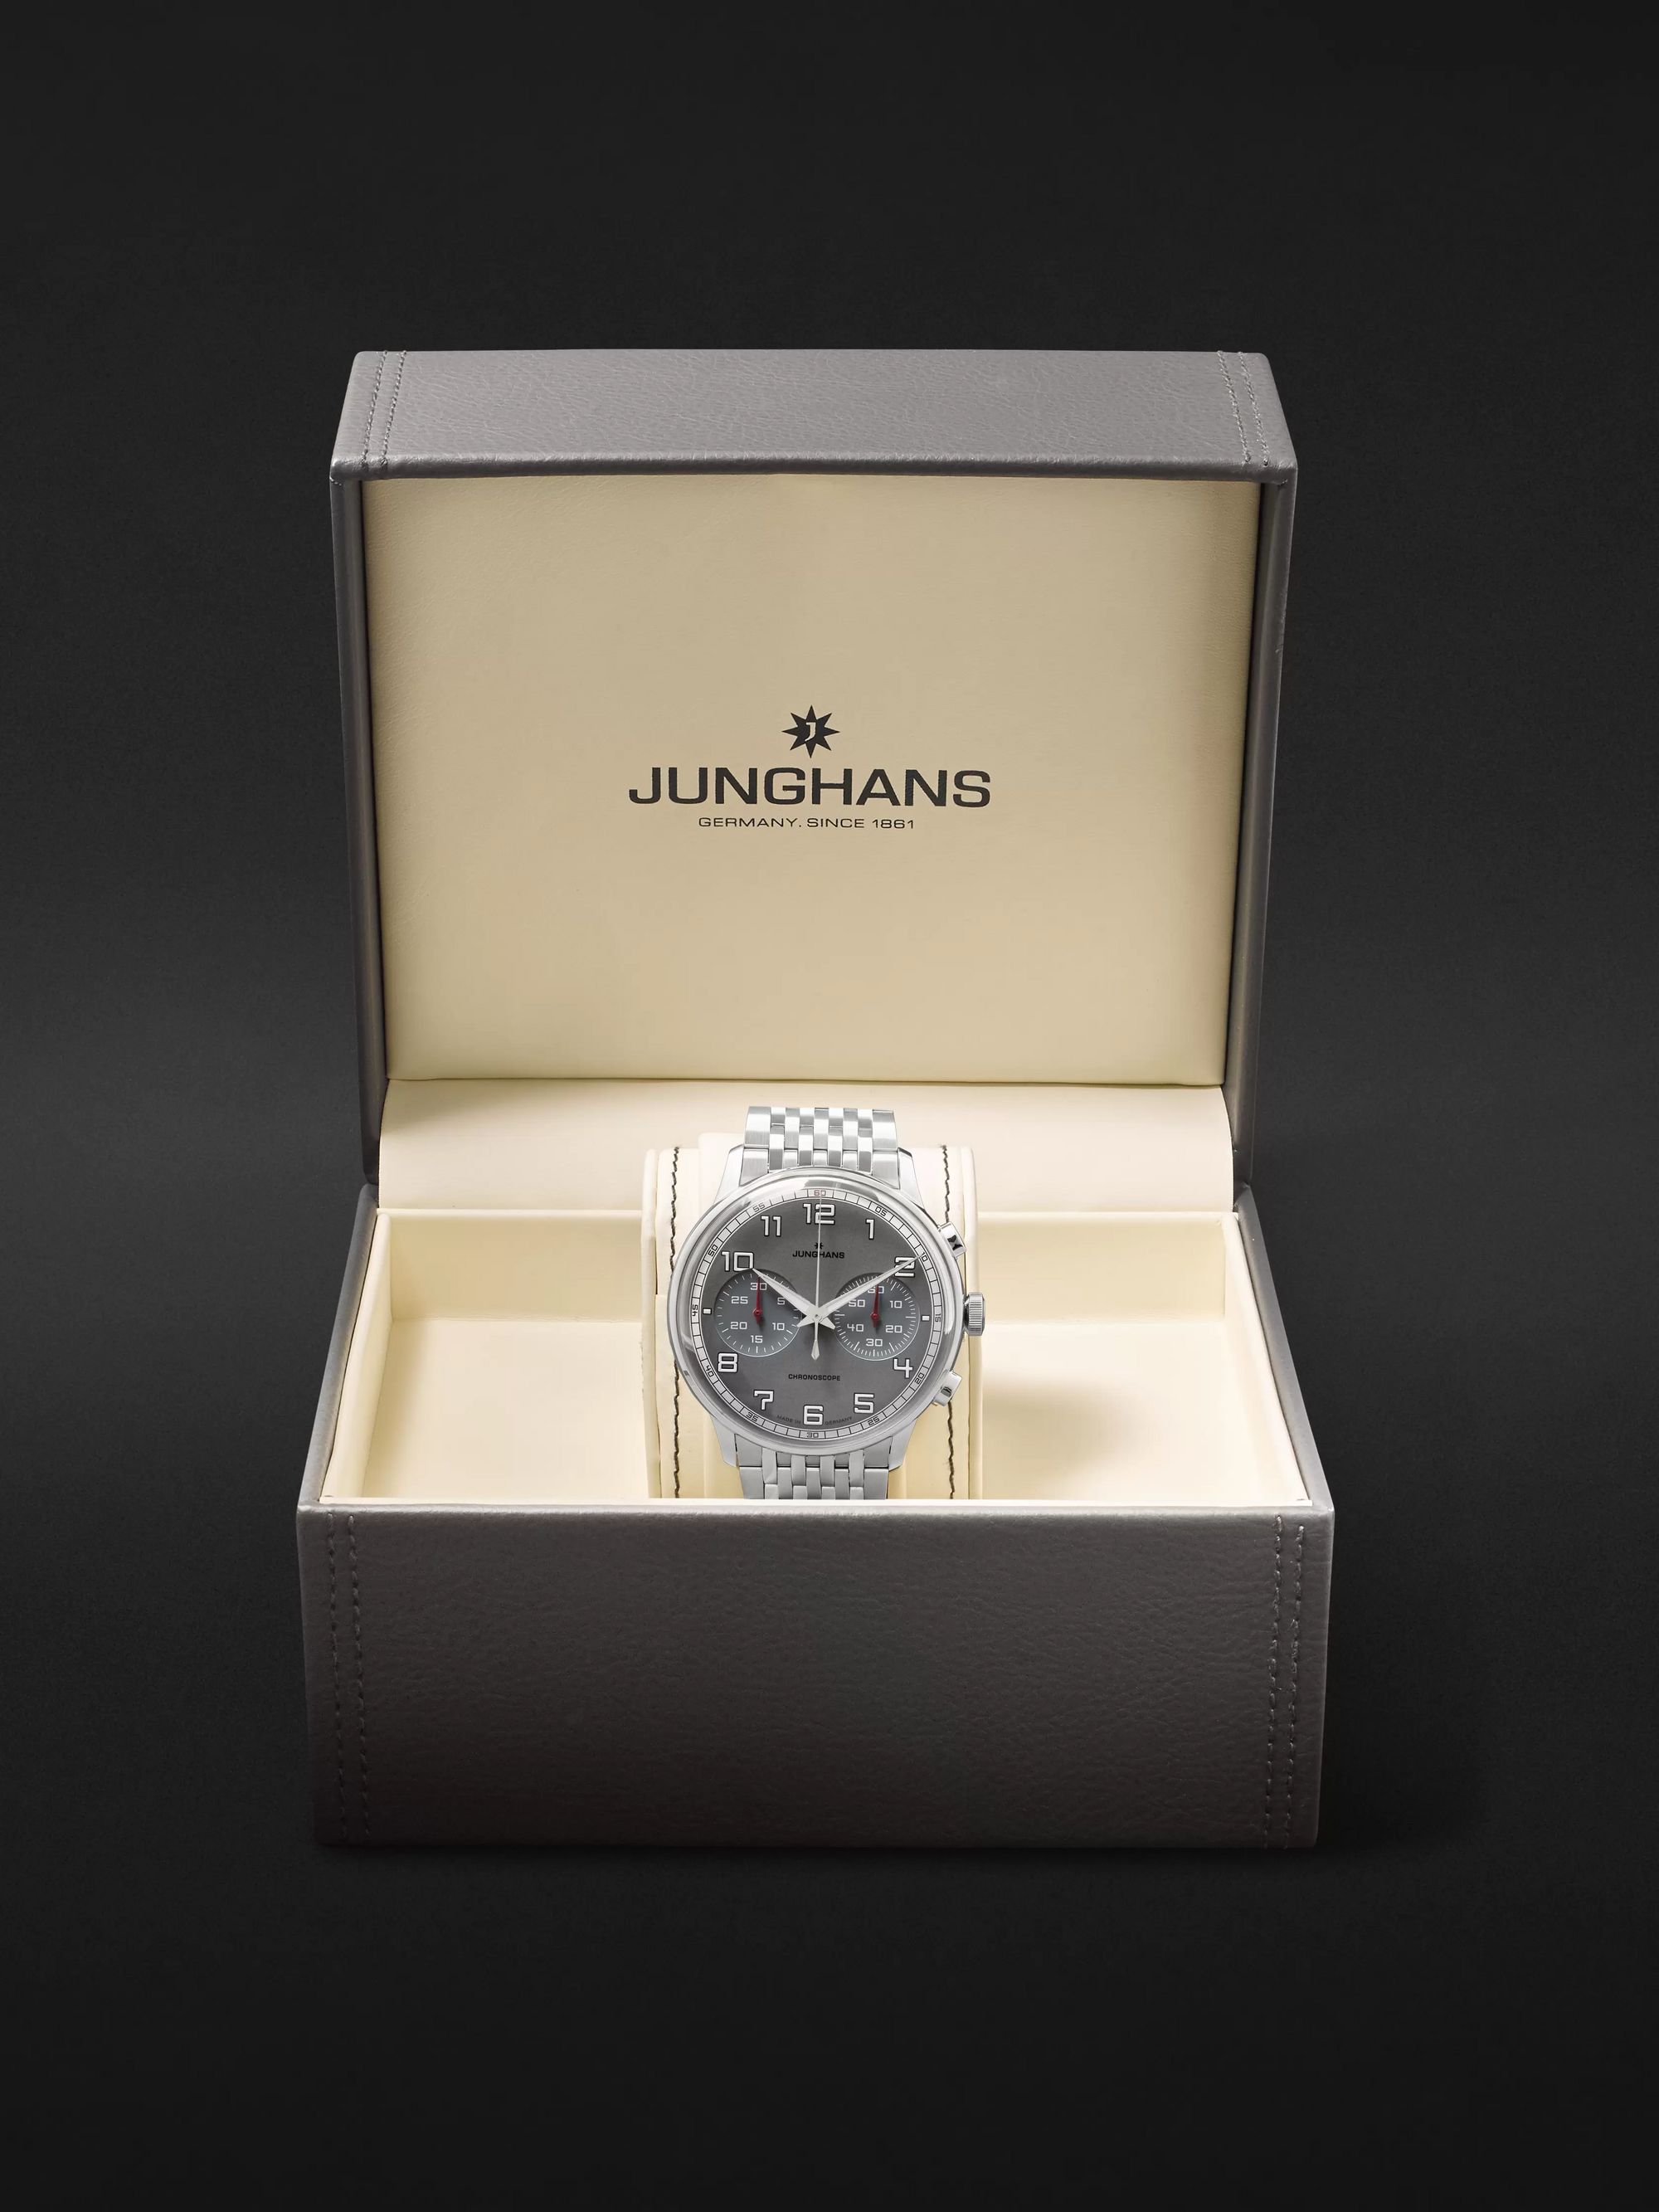 JUNGHANS Meister Driver Chronoscope Automatic 40mm Stainless Steel Watch, Ref. No. 027/3686.44